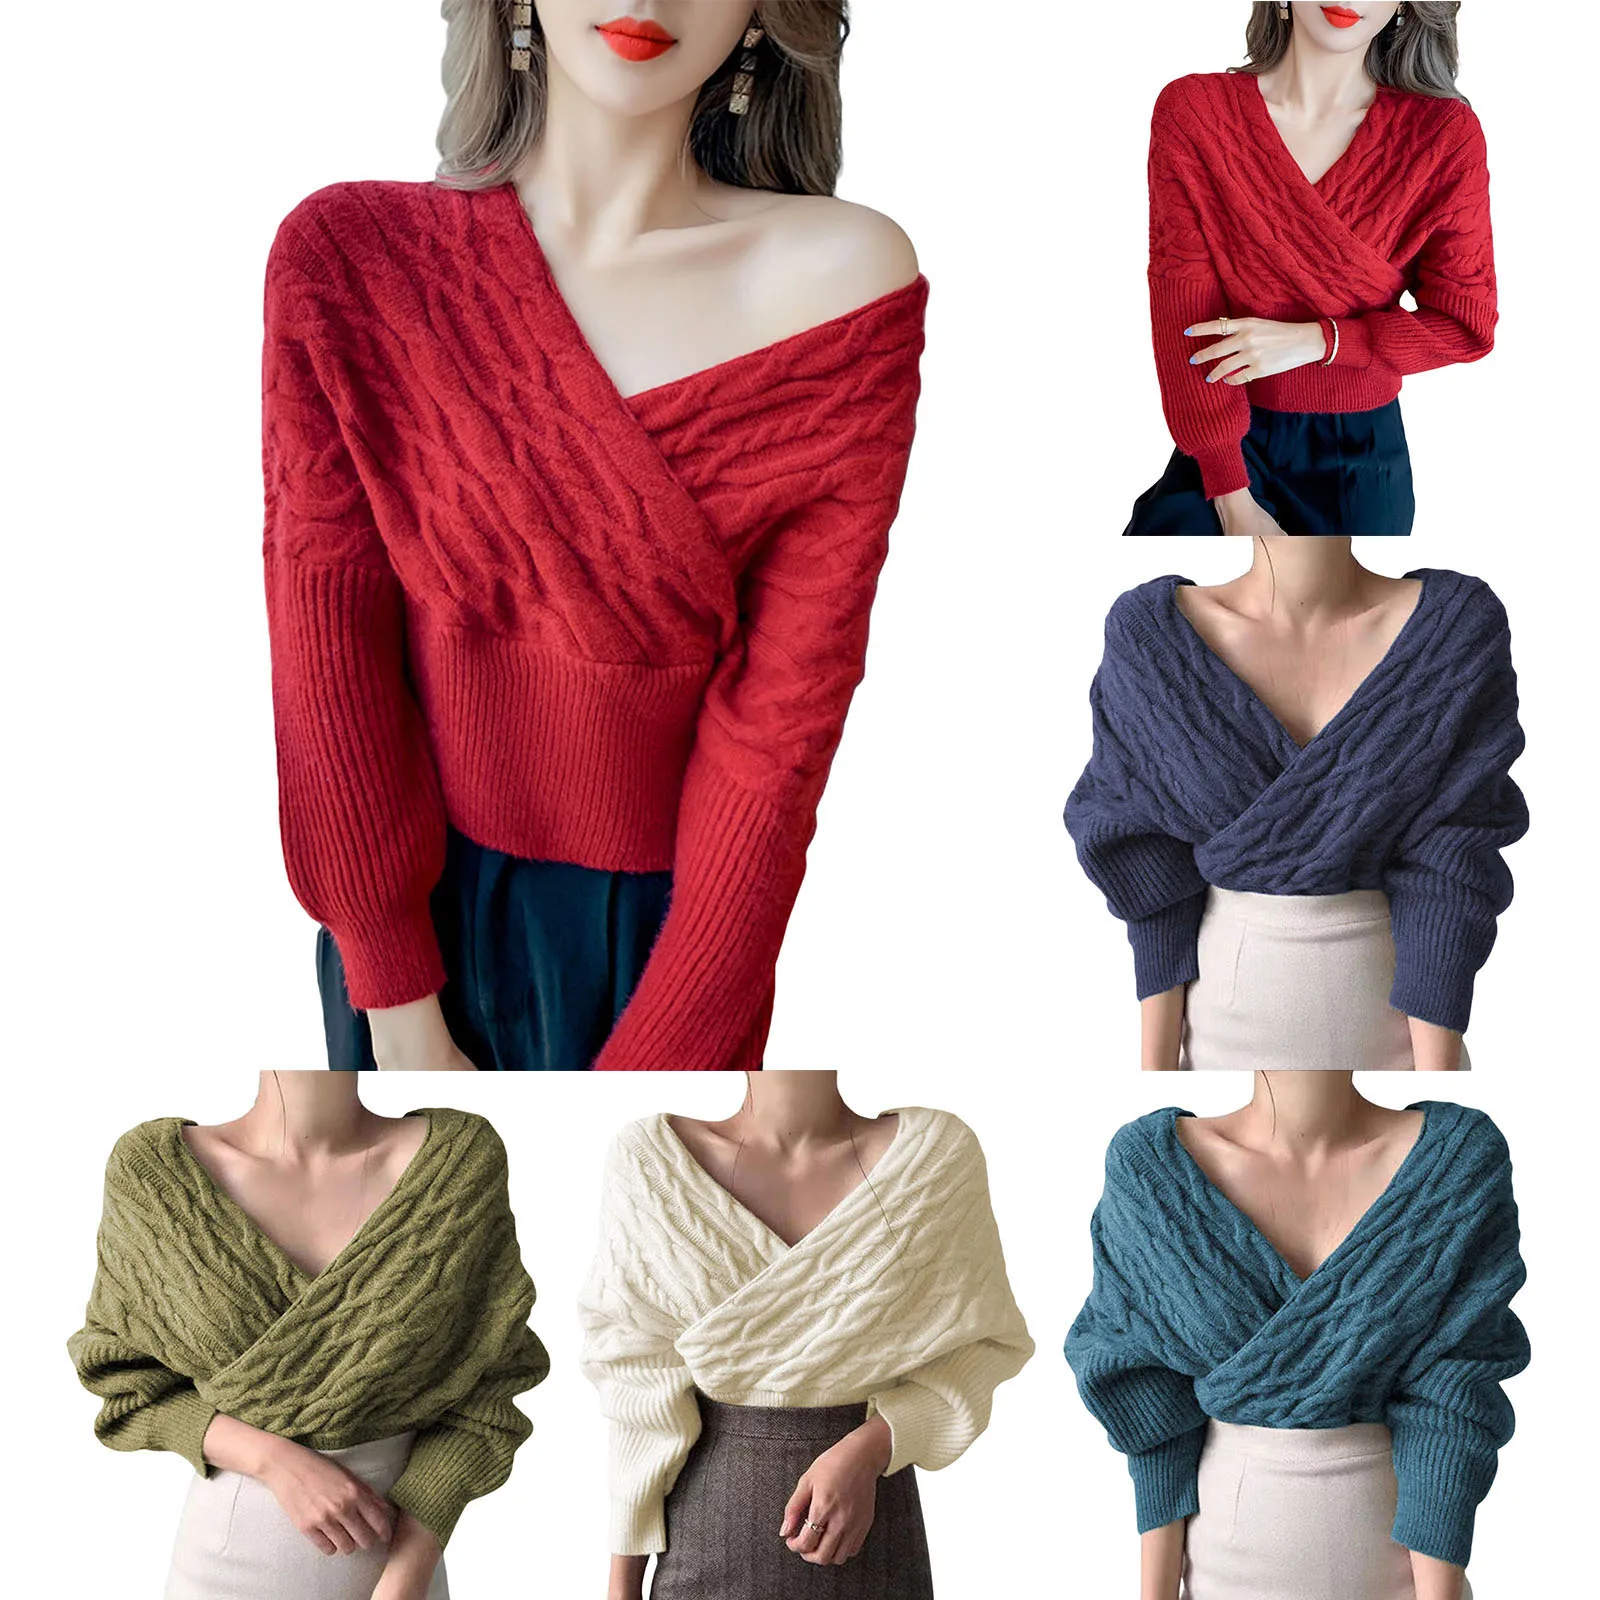 

Women Long Batwing Sleeves Sweater Plunging Neckline Solid Color Knitwear One Size Knitted Pullover